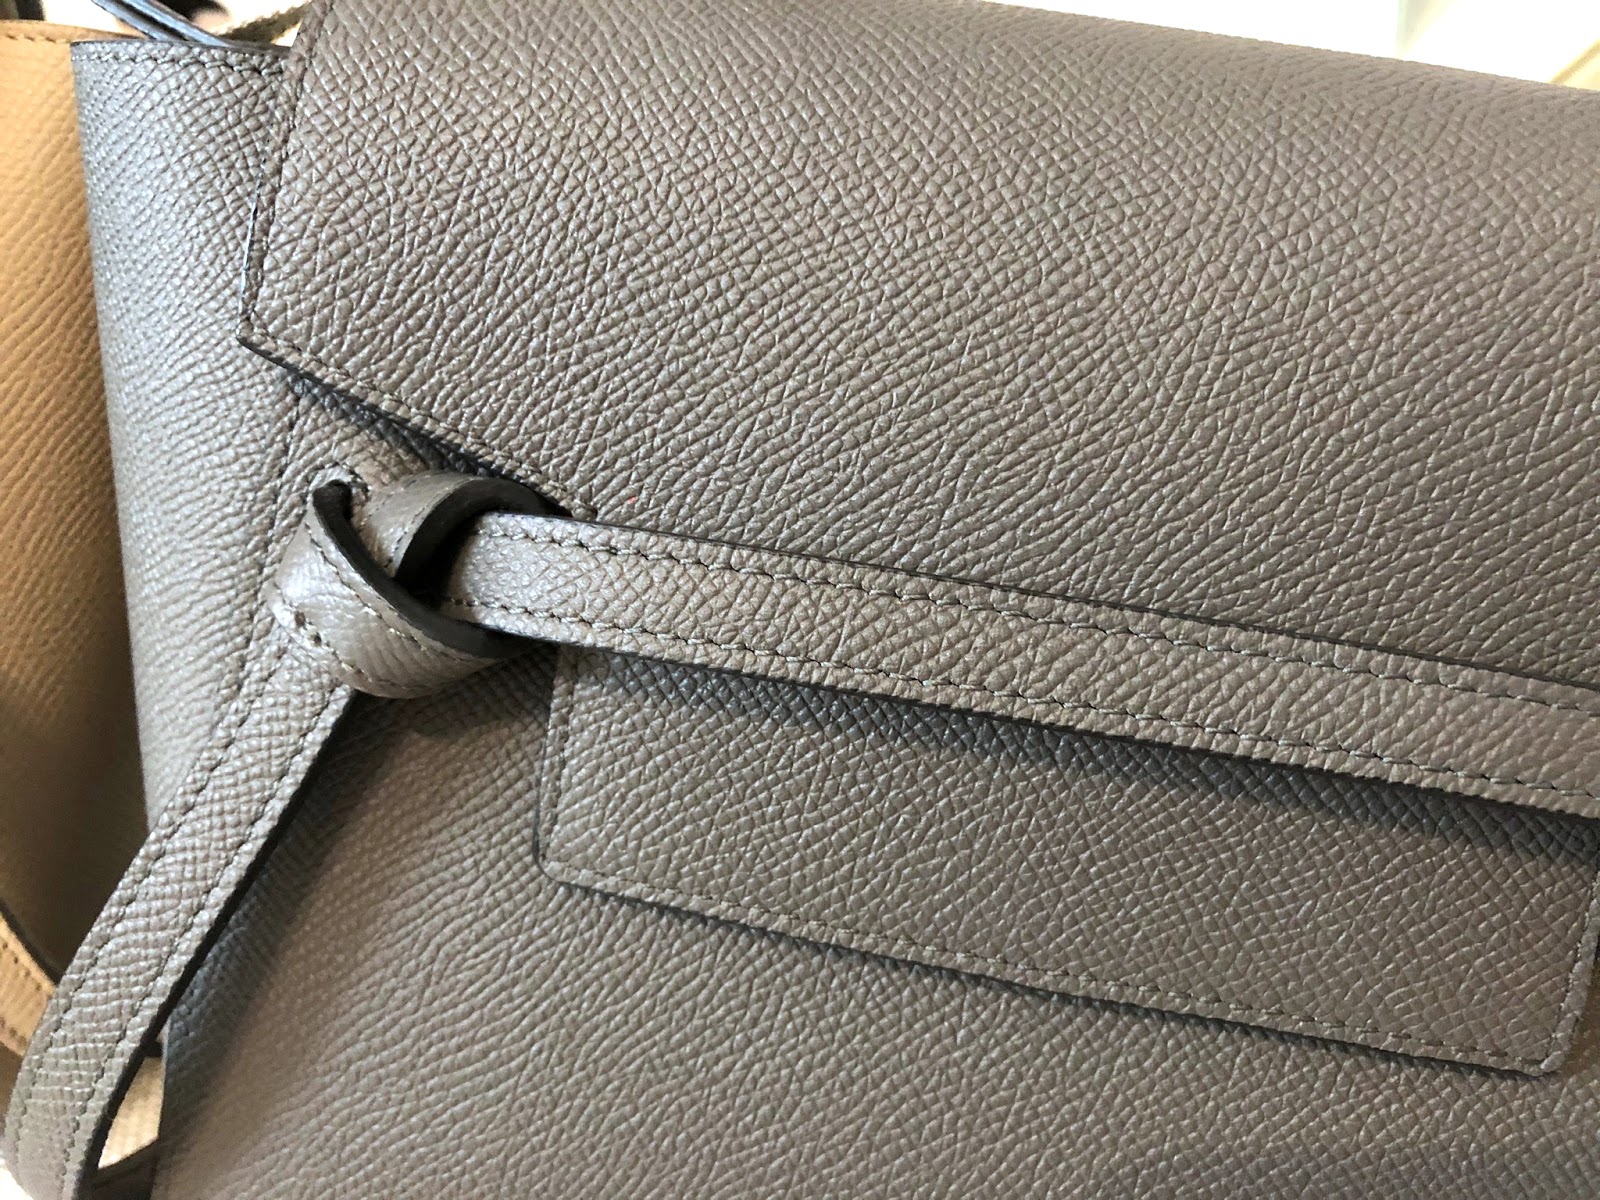 Review of Celine Belt Bag Nano? Is it outdated? Can you dress up with it? :  r/handbags